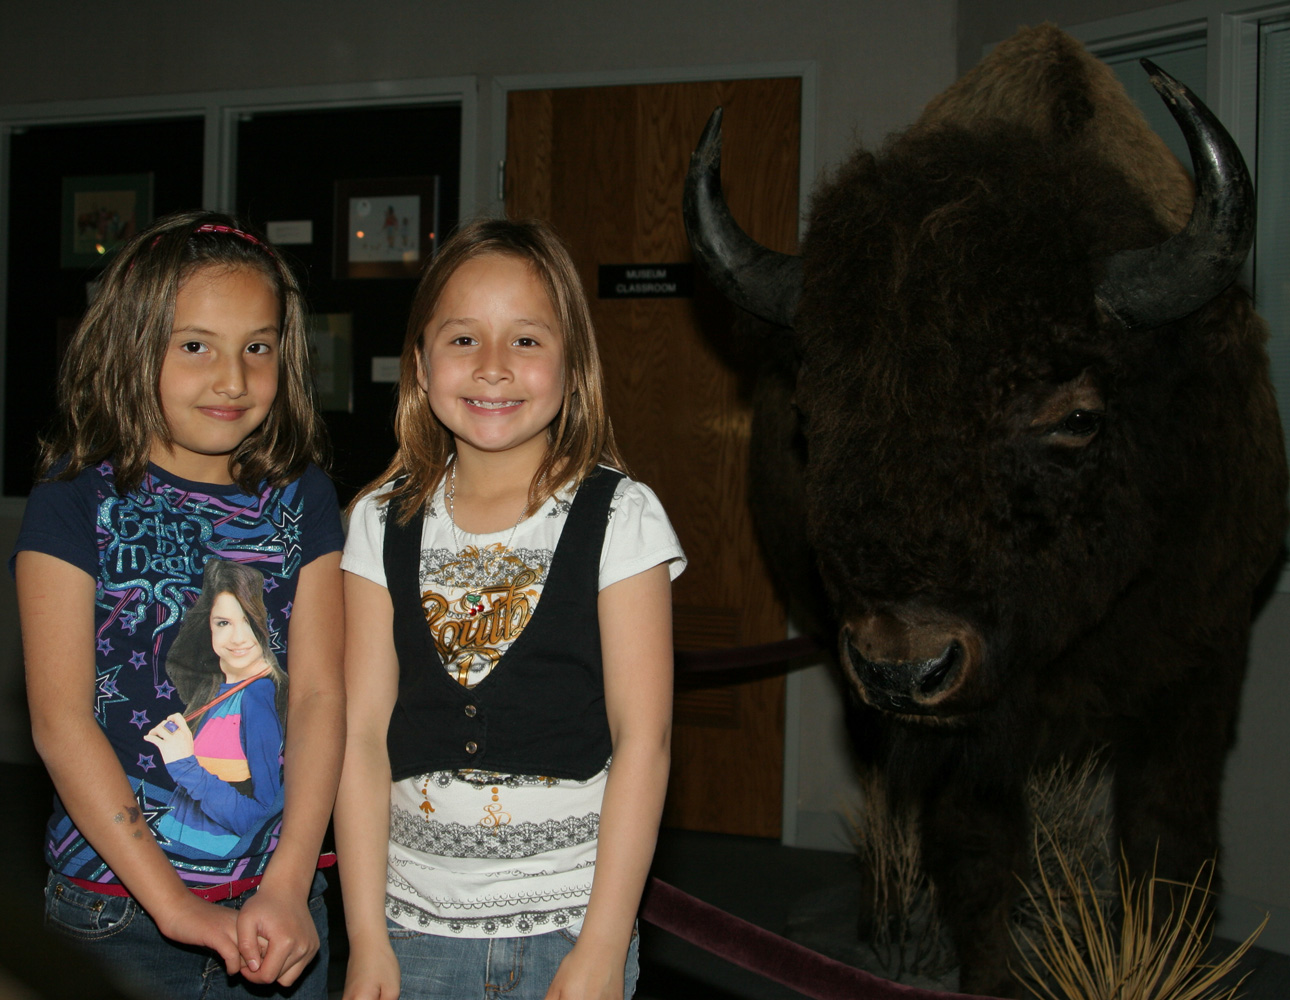 The Lakota children can see a life-sized buffalo in one of the museum’s displays!